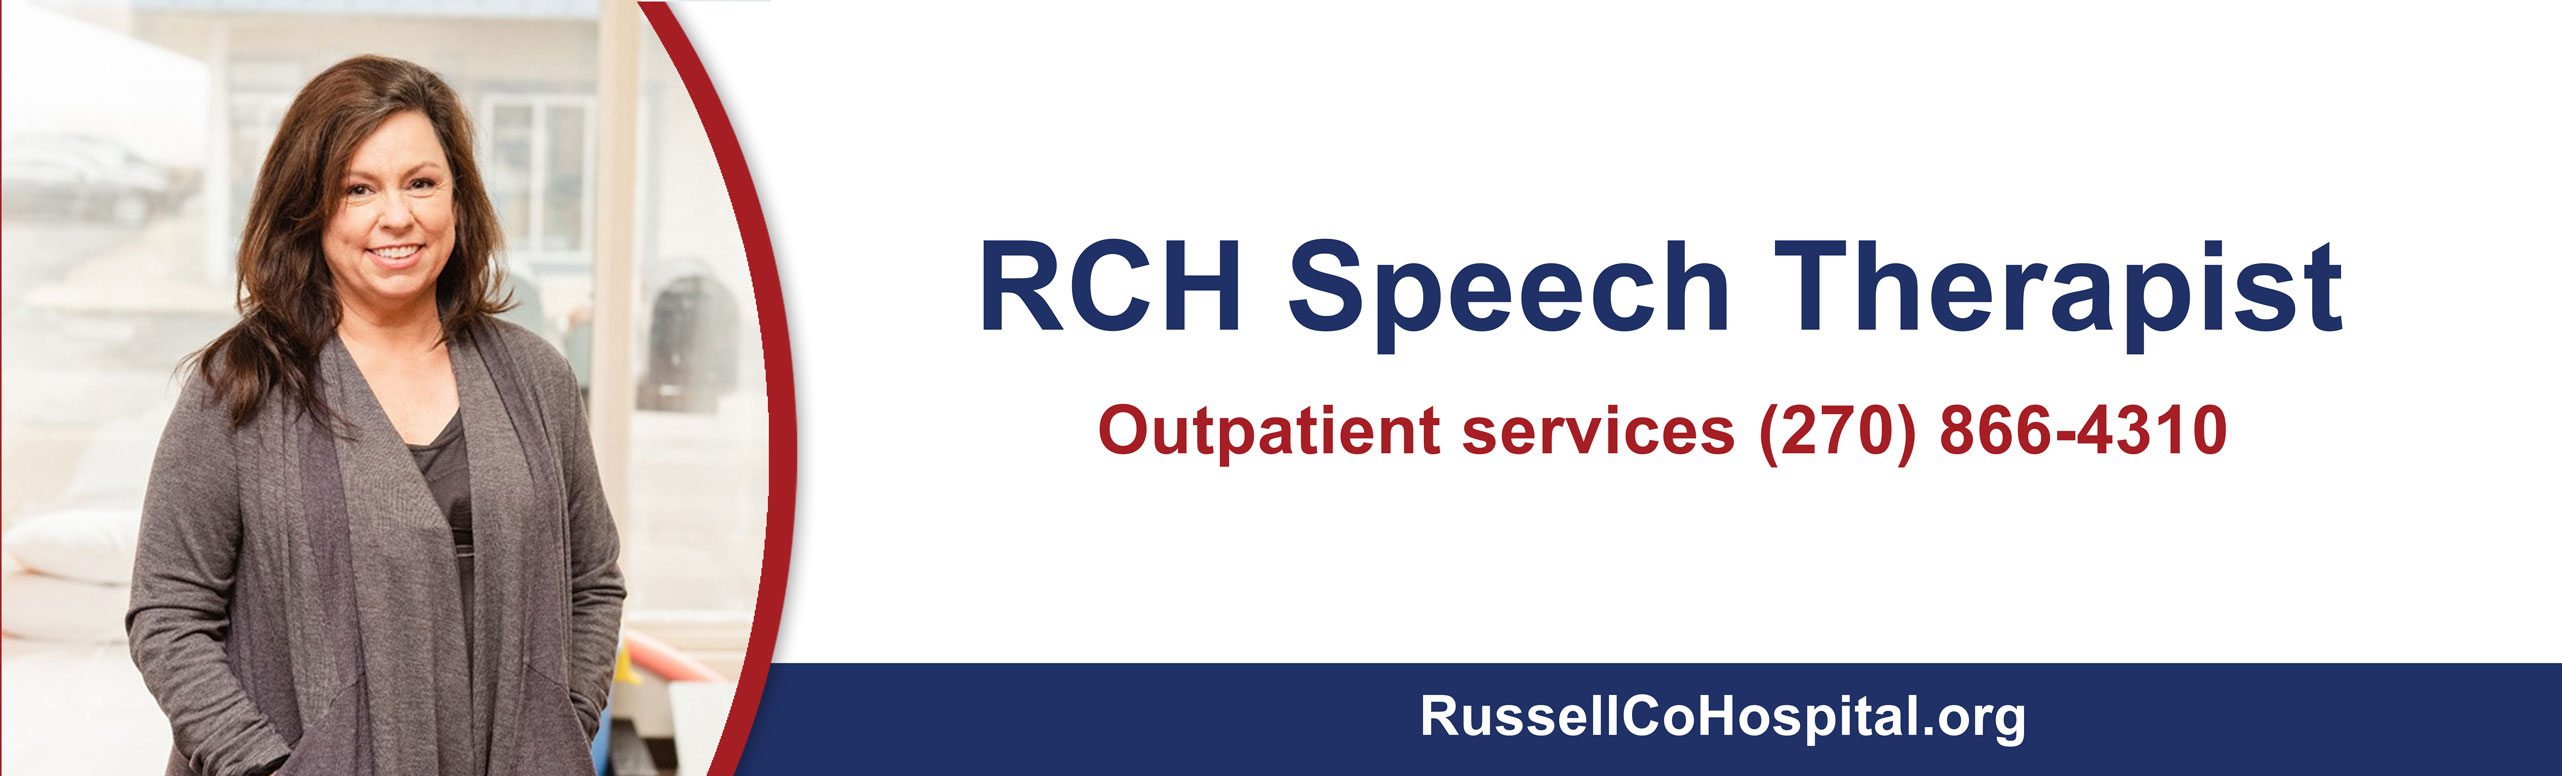 Banner picture of female Speech Therapist. Banner says:
RCH Speech Therapist
Outpatient Services (270) 866-4310
RussellCoHospital.org